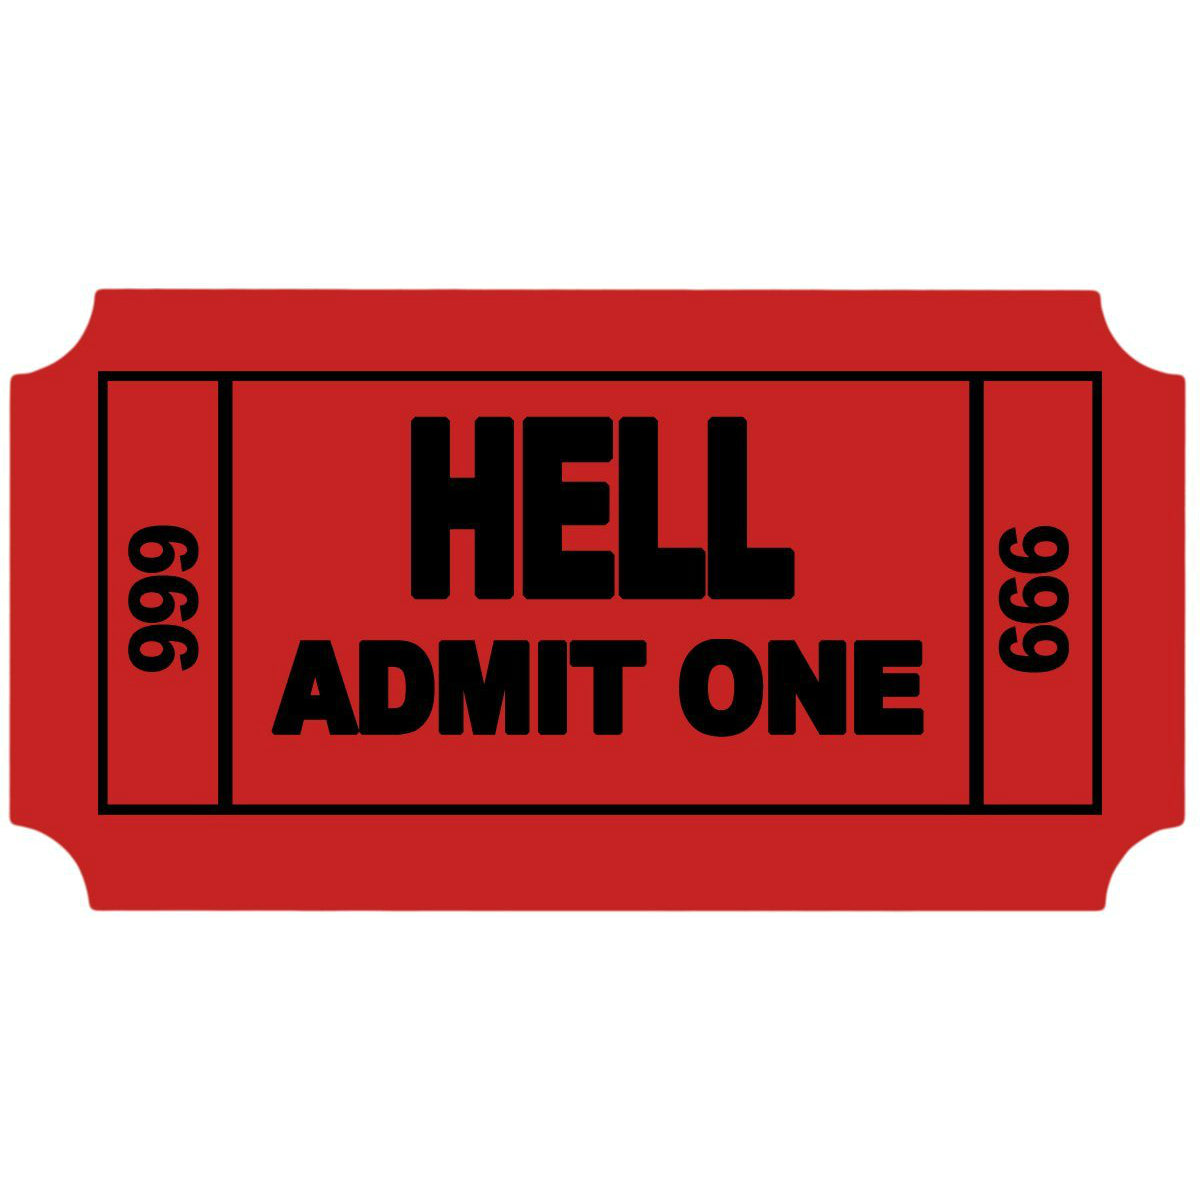 Ticket to Hell - OddGifts.com